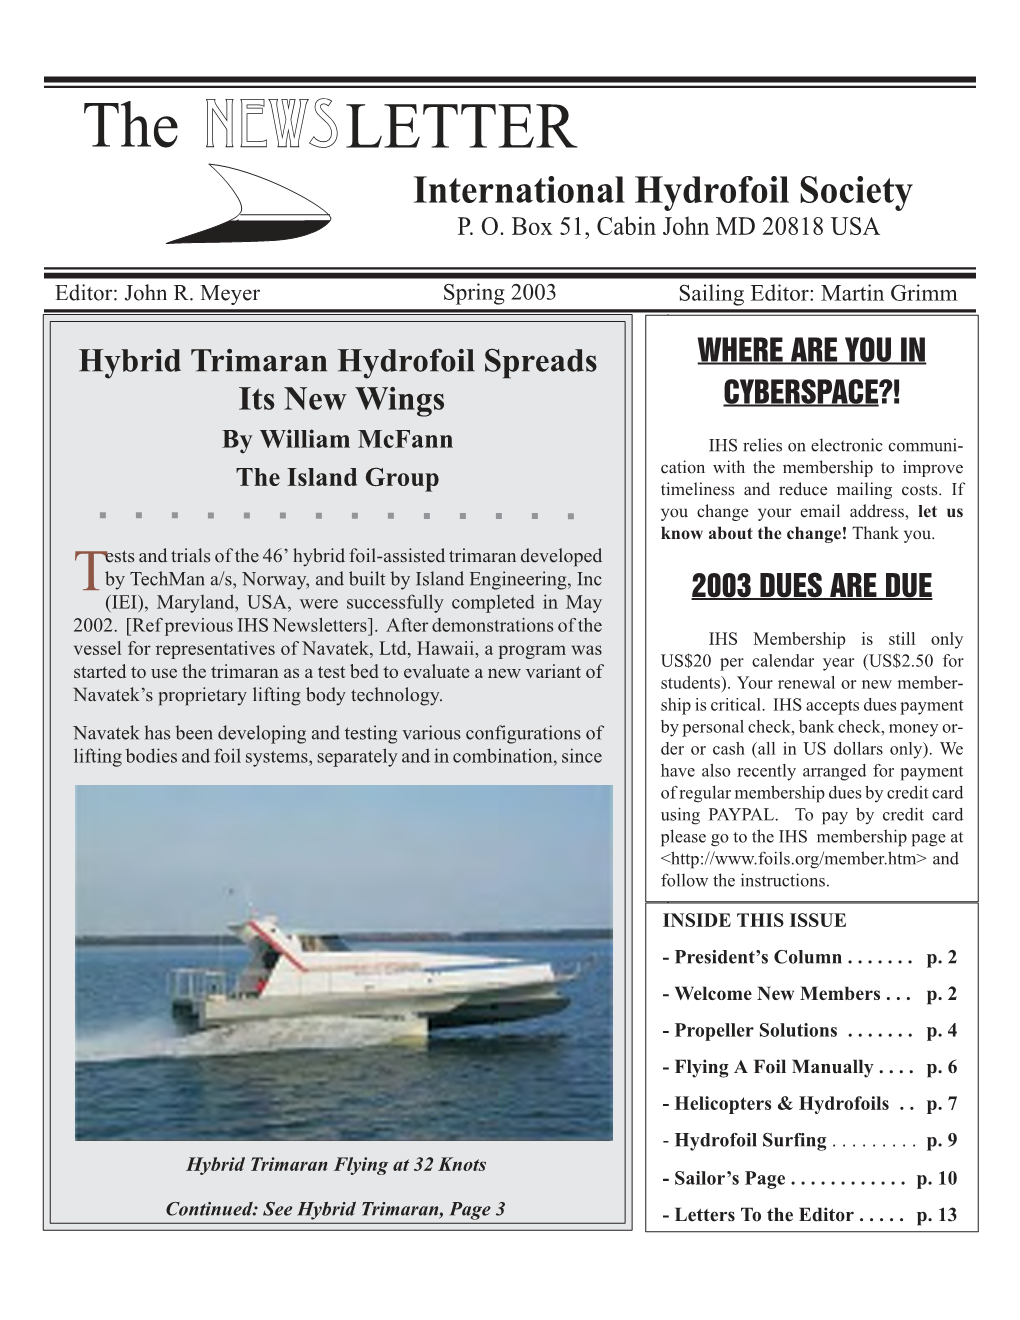 Collected IHS Newsletters for 2003